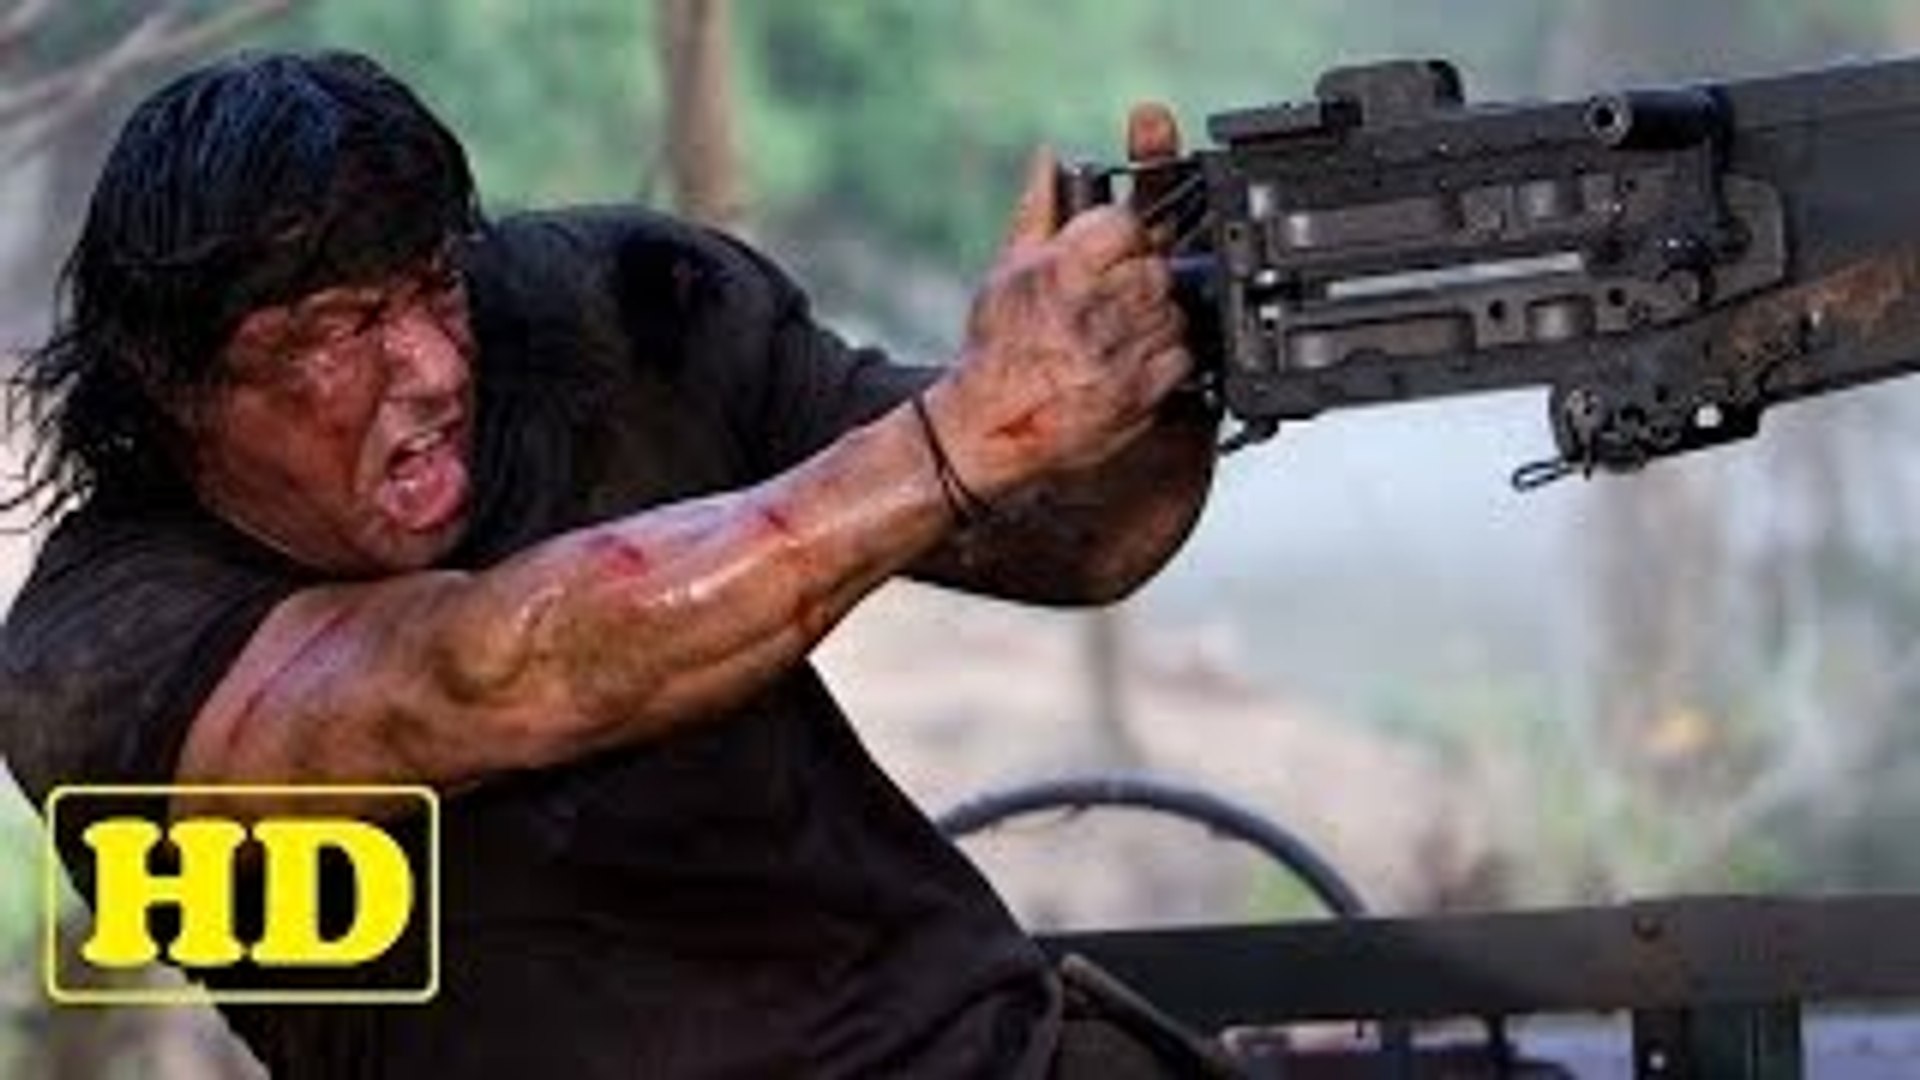 Action Movies 2018 English - Watch NOW - Sylvester Stallone Star Movies -  video Dailymotion